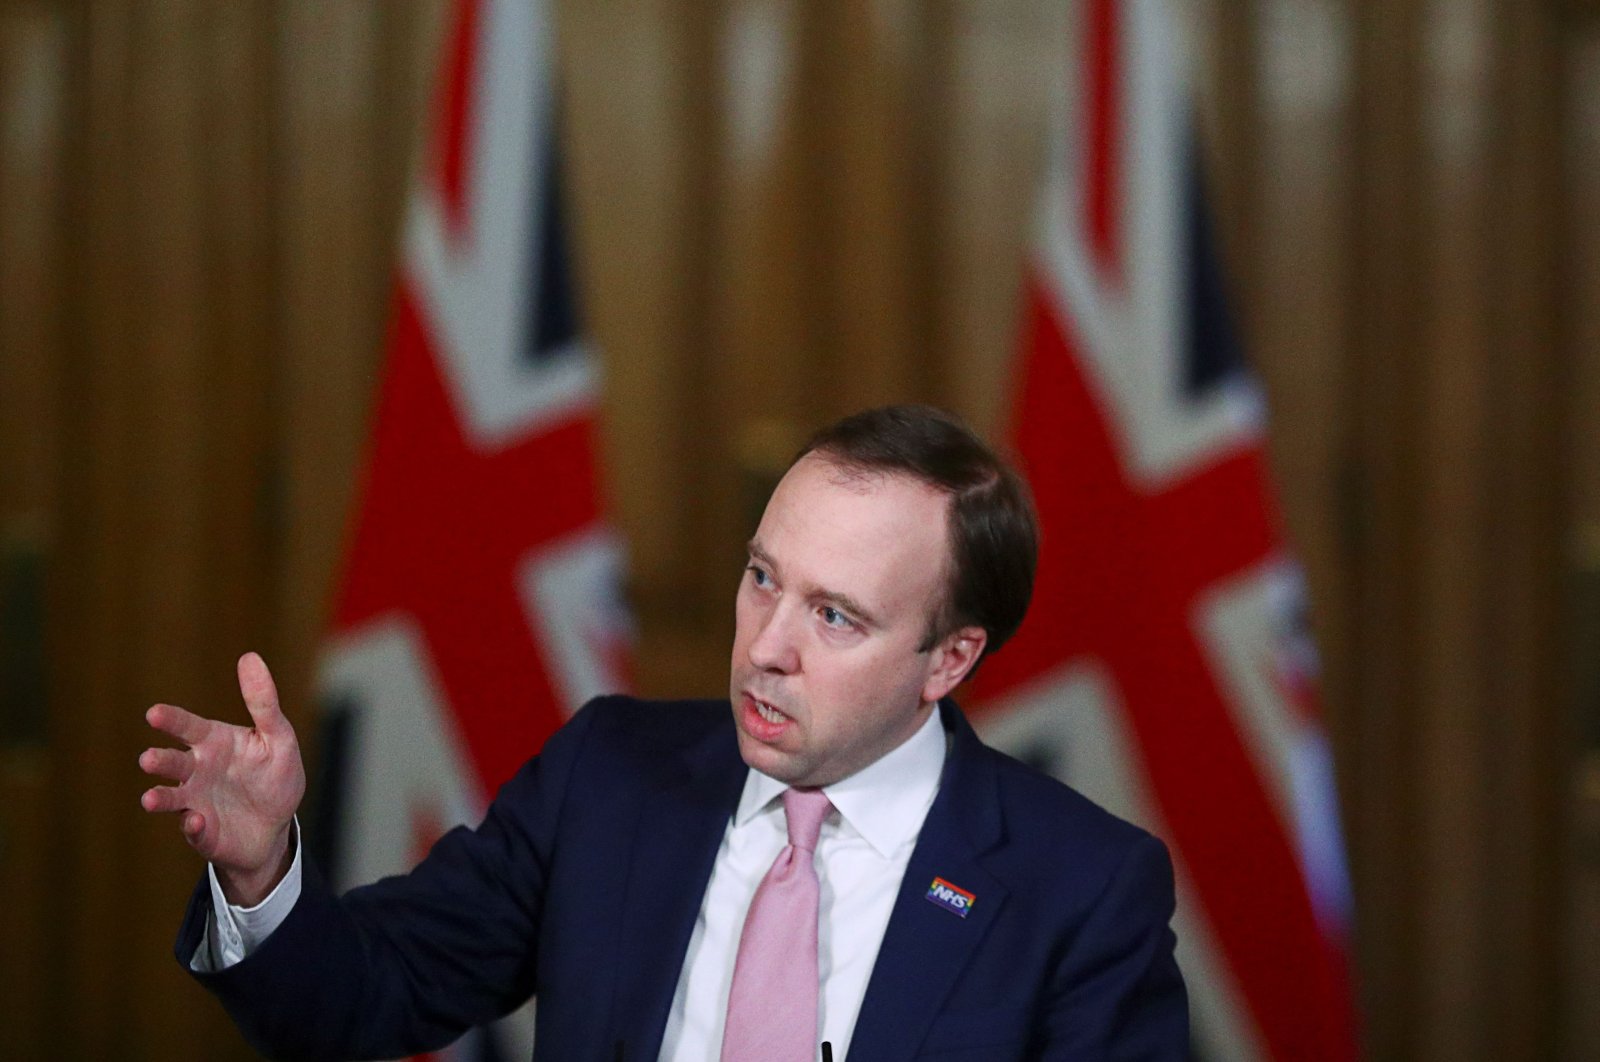 Britain's Health Secretary Matt Hancock gives an update on the coronavirus covid-19 pandemic during a virtual press conference inside 10 Downing Street in central London on March 5, 2021. (AFP)